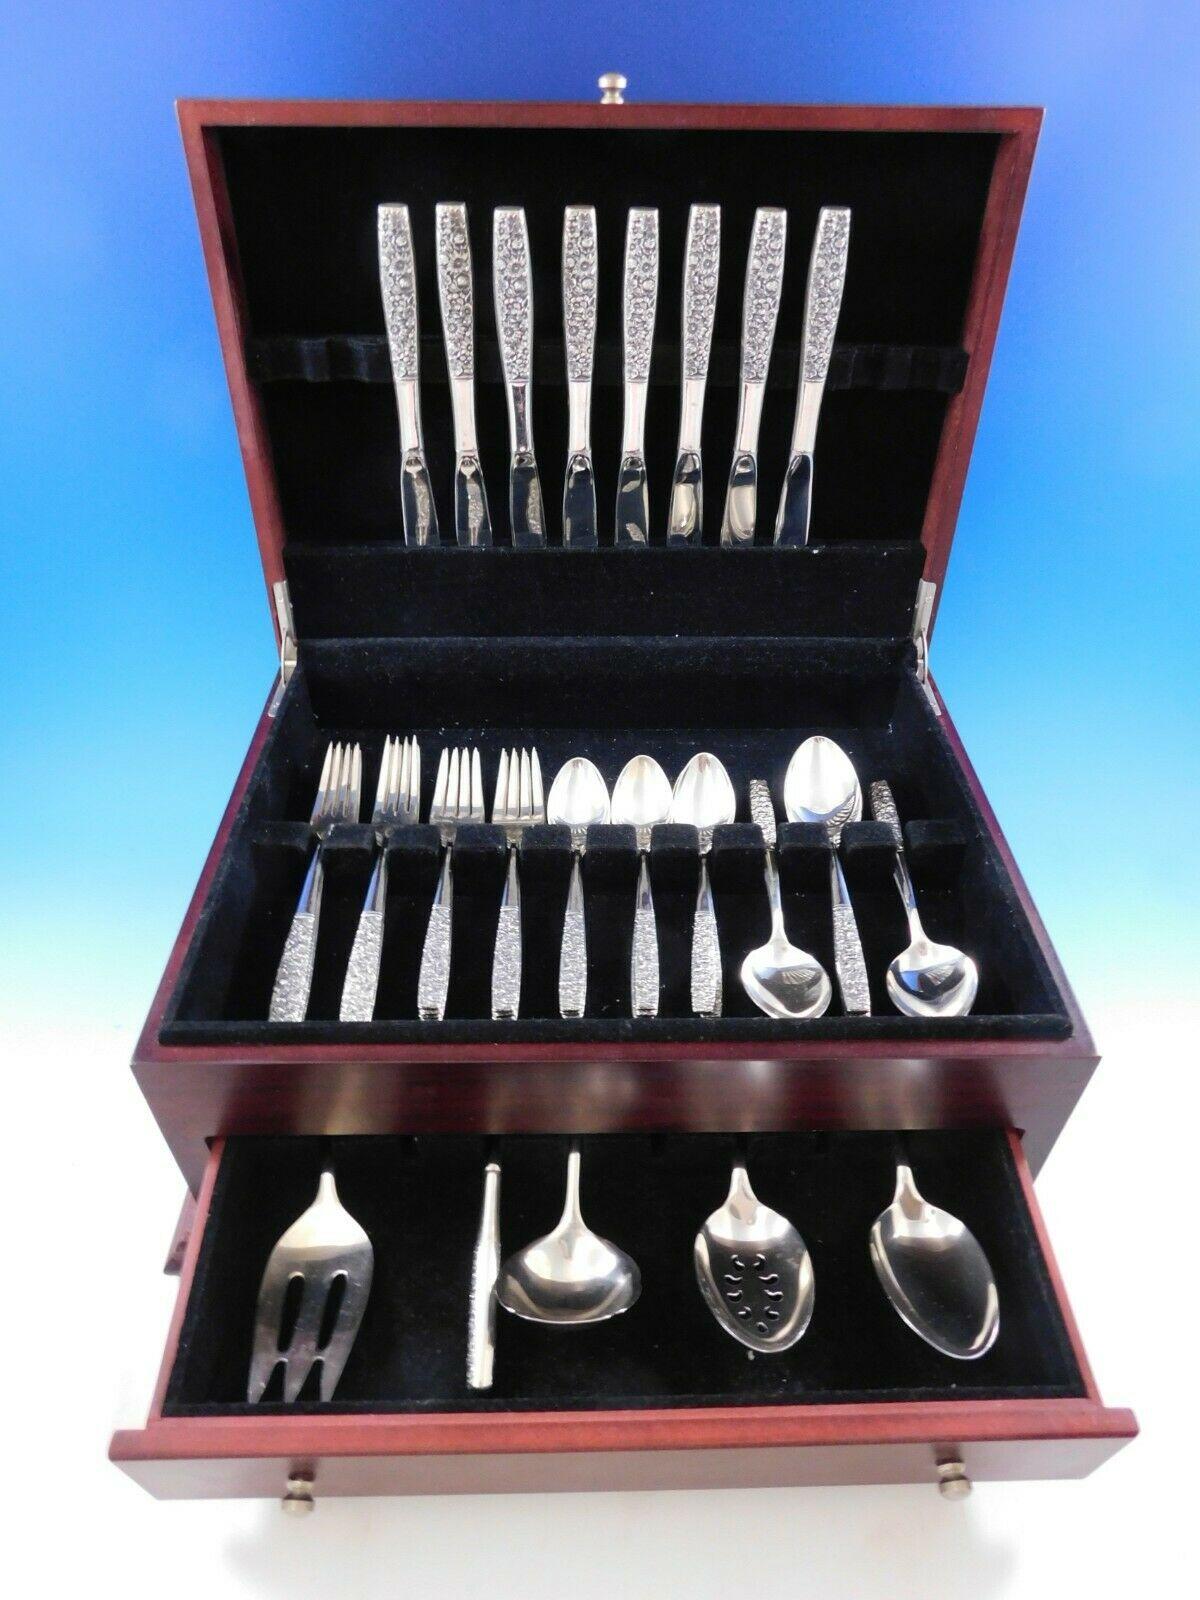 Contessina by Towle, circa 1965, floral repousse sterling silver flatware set - 45 Pieces. This set includes:

8 knives, 9